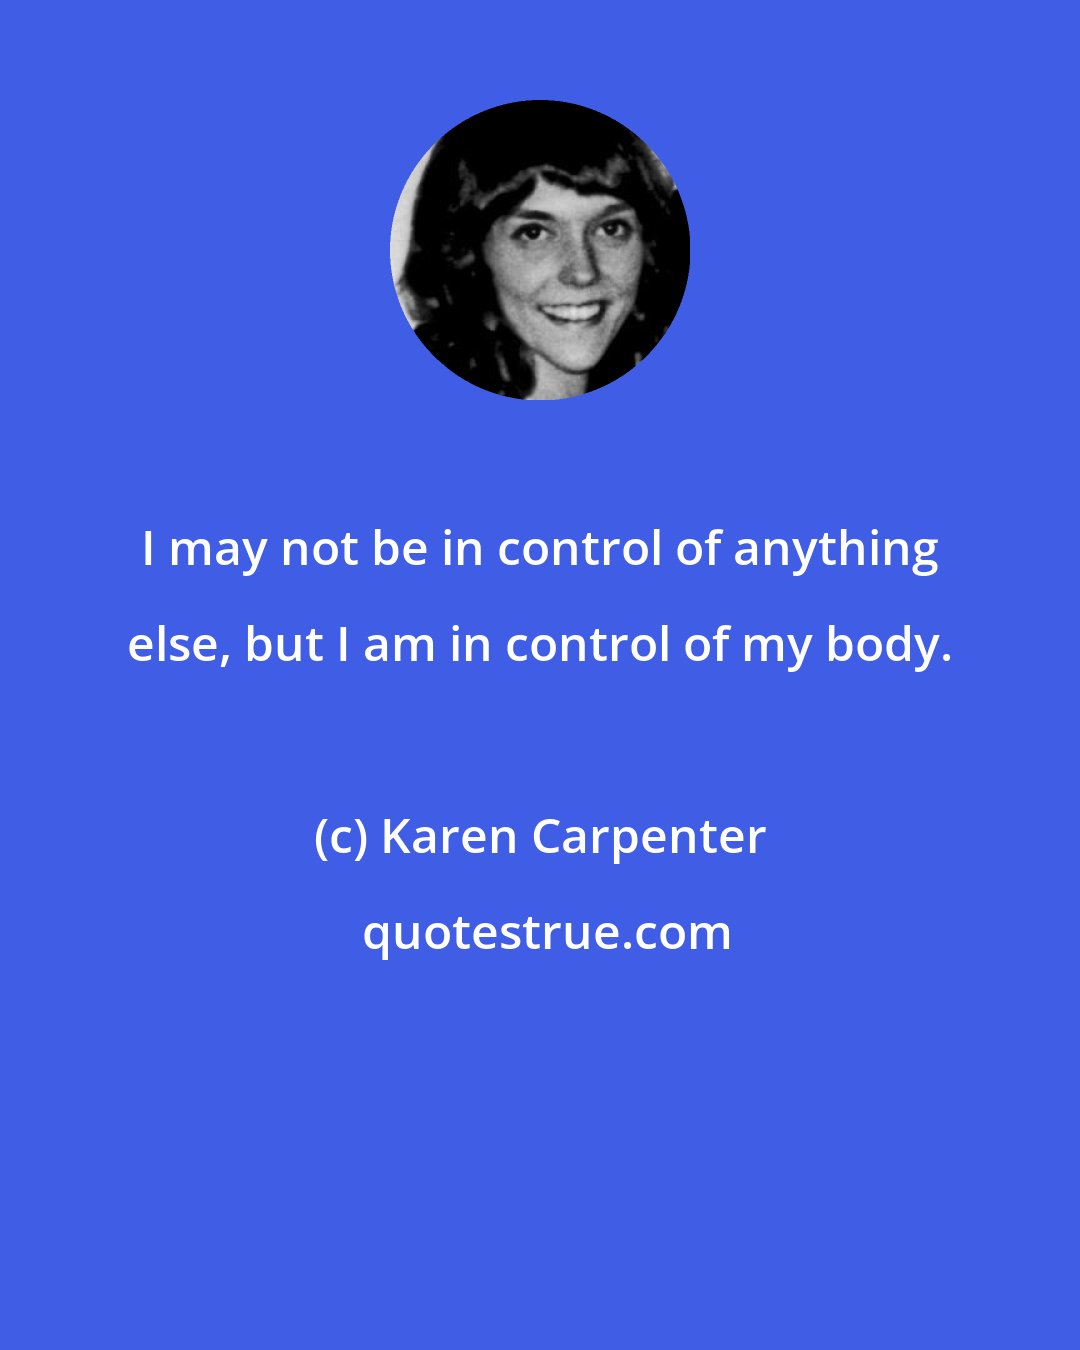 Karen Carpenter: I may not be in control of anything else, but I am in control of my body.